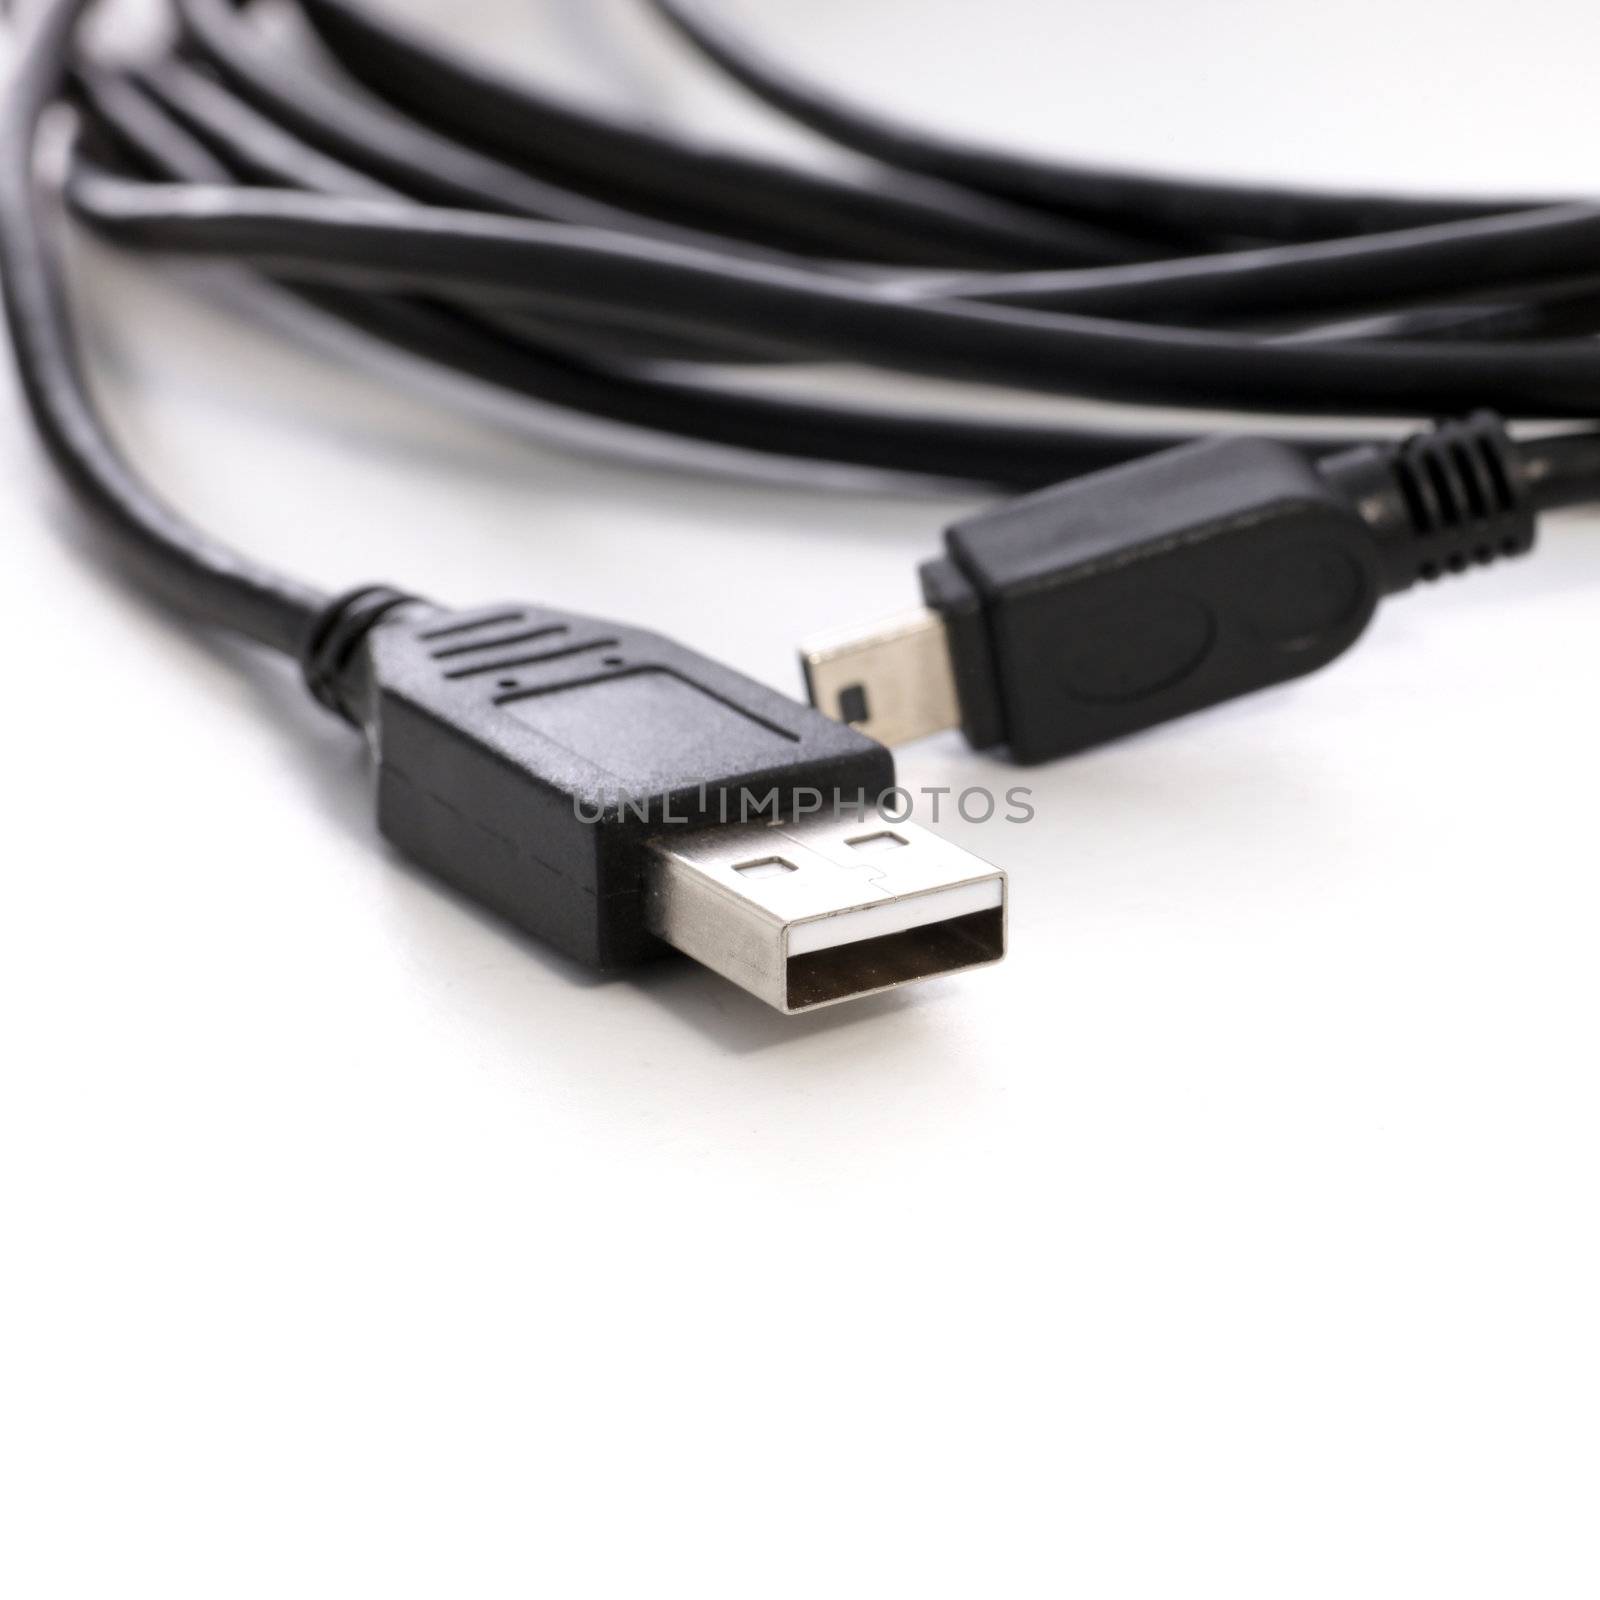 Computer USB cable by Farina6000